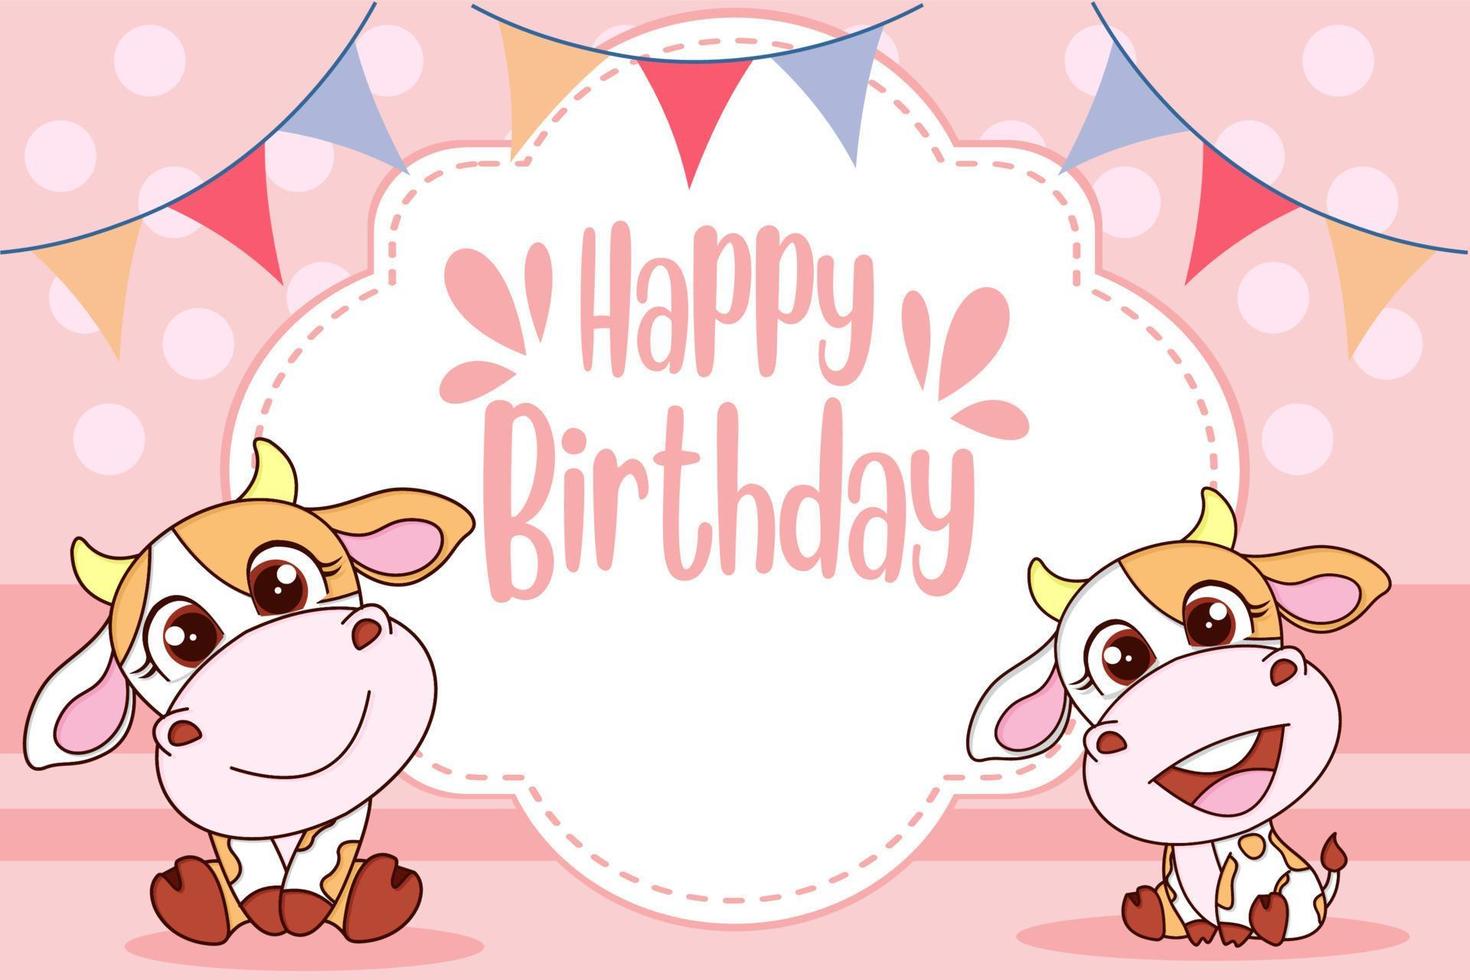 Children's birthday card with cute cow vector